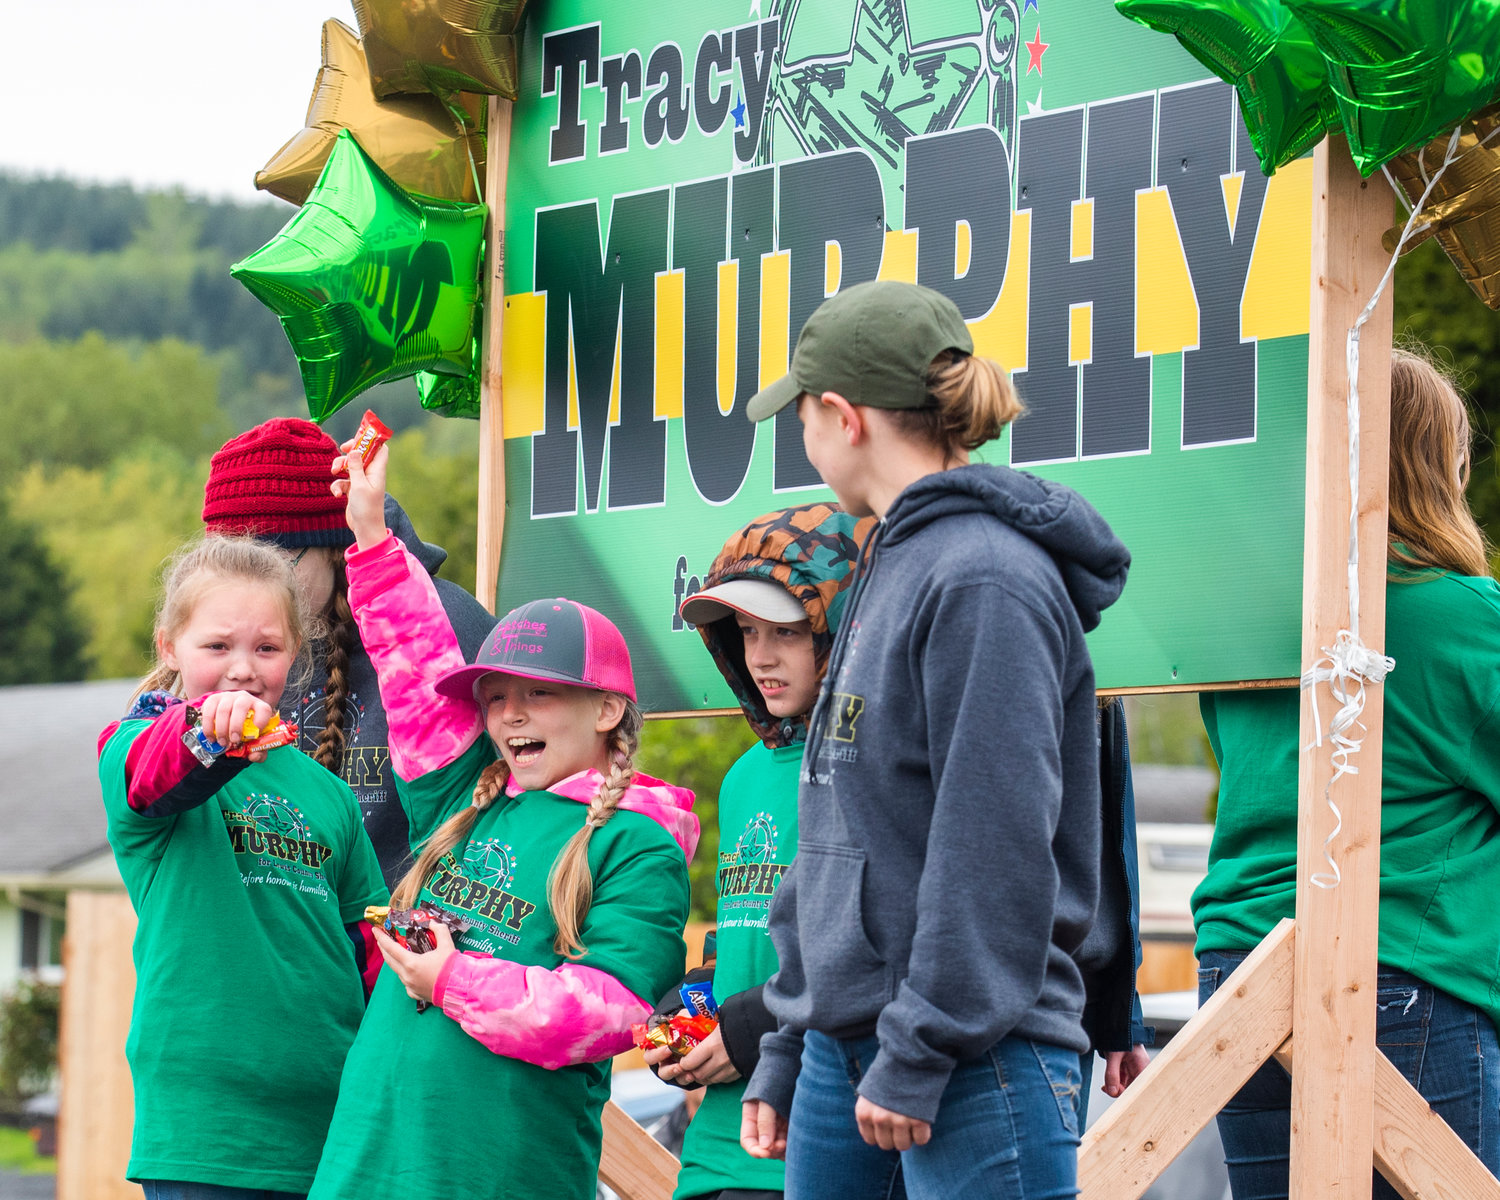 Kids throw candy from a “Tracy Murphy,” float during the Vader May Day Parade Saturday morning.